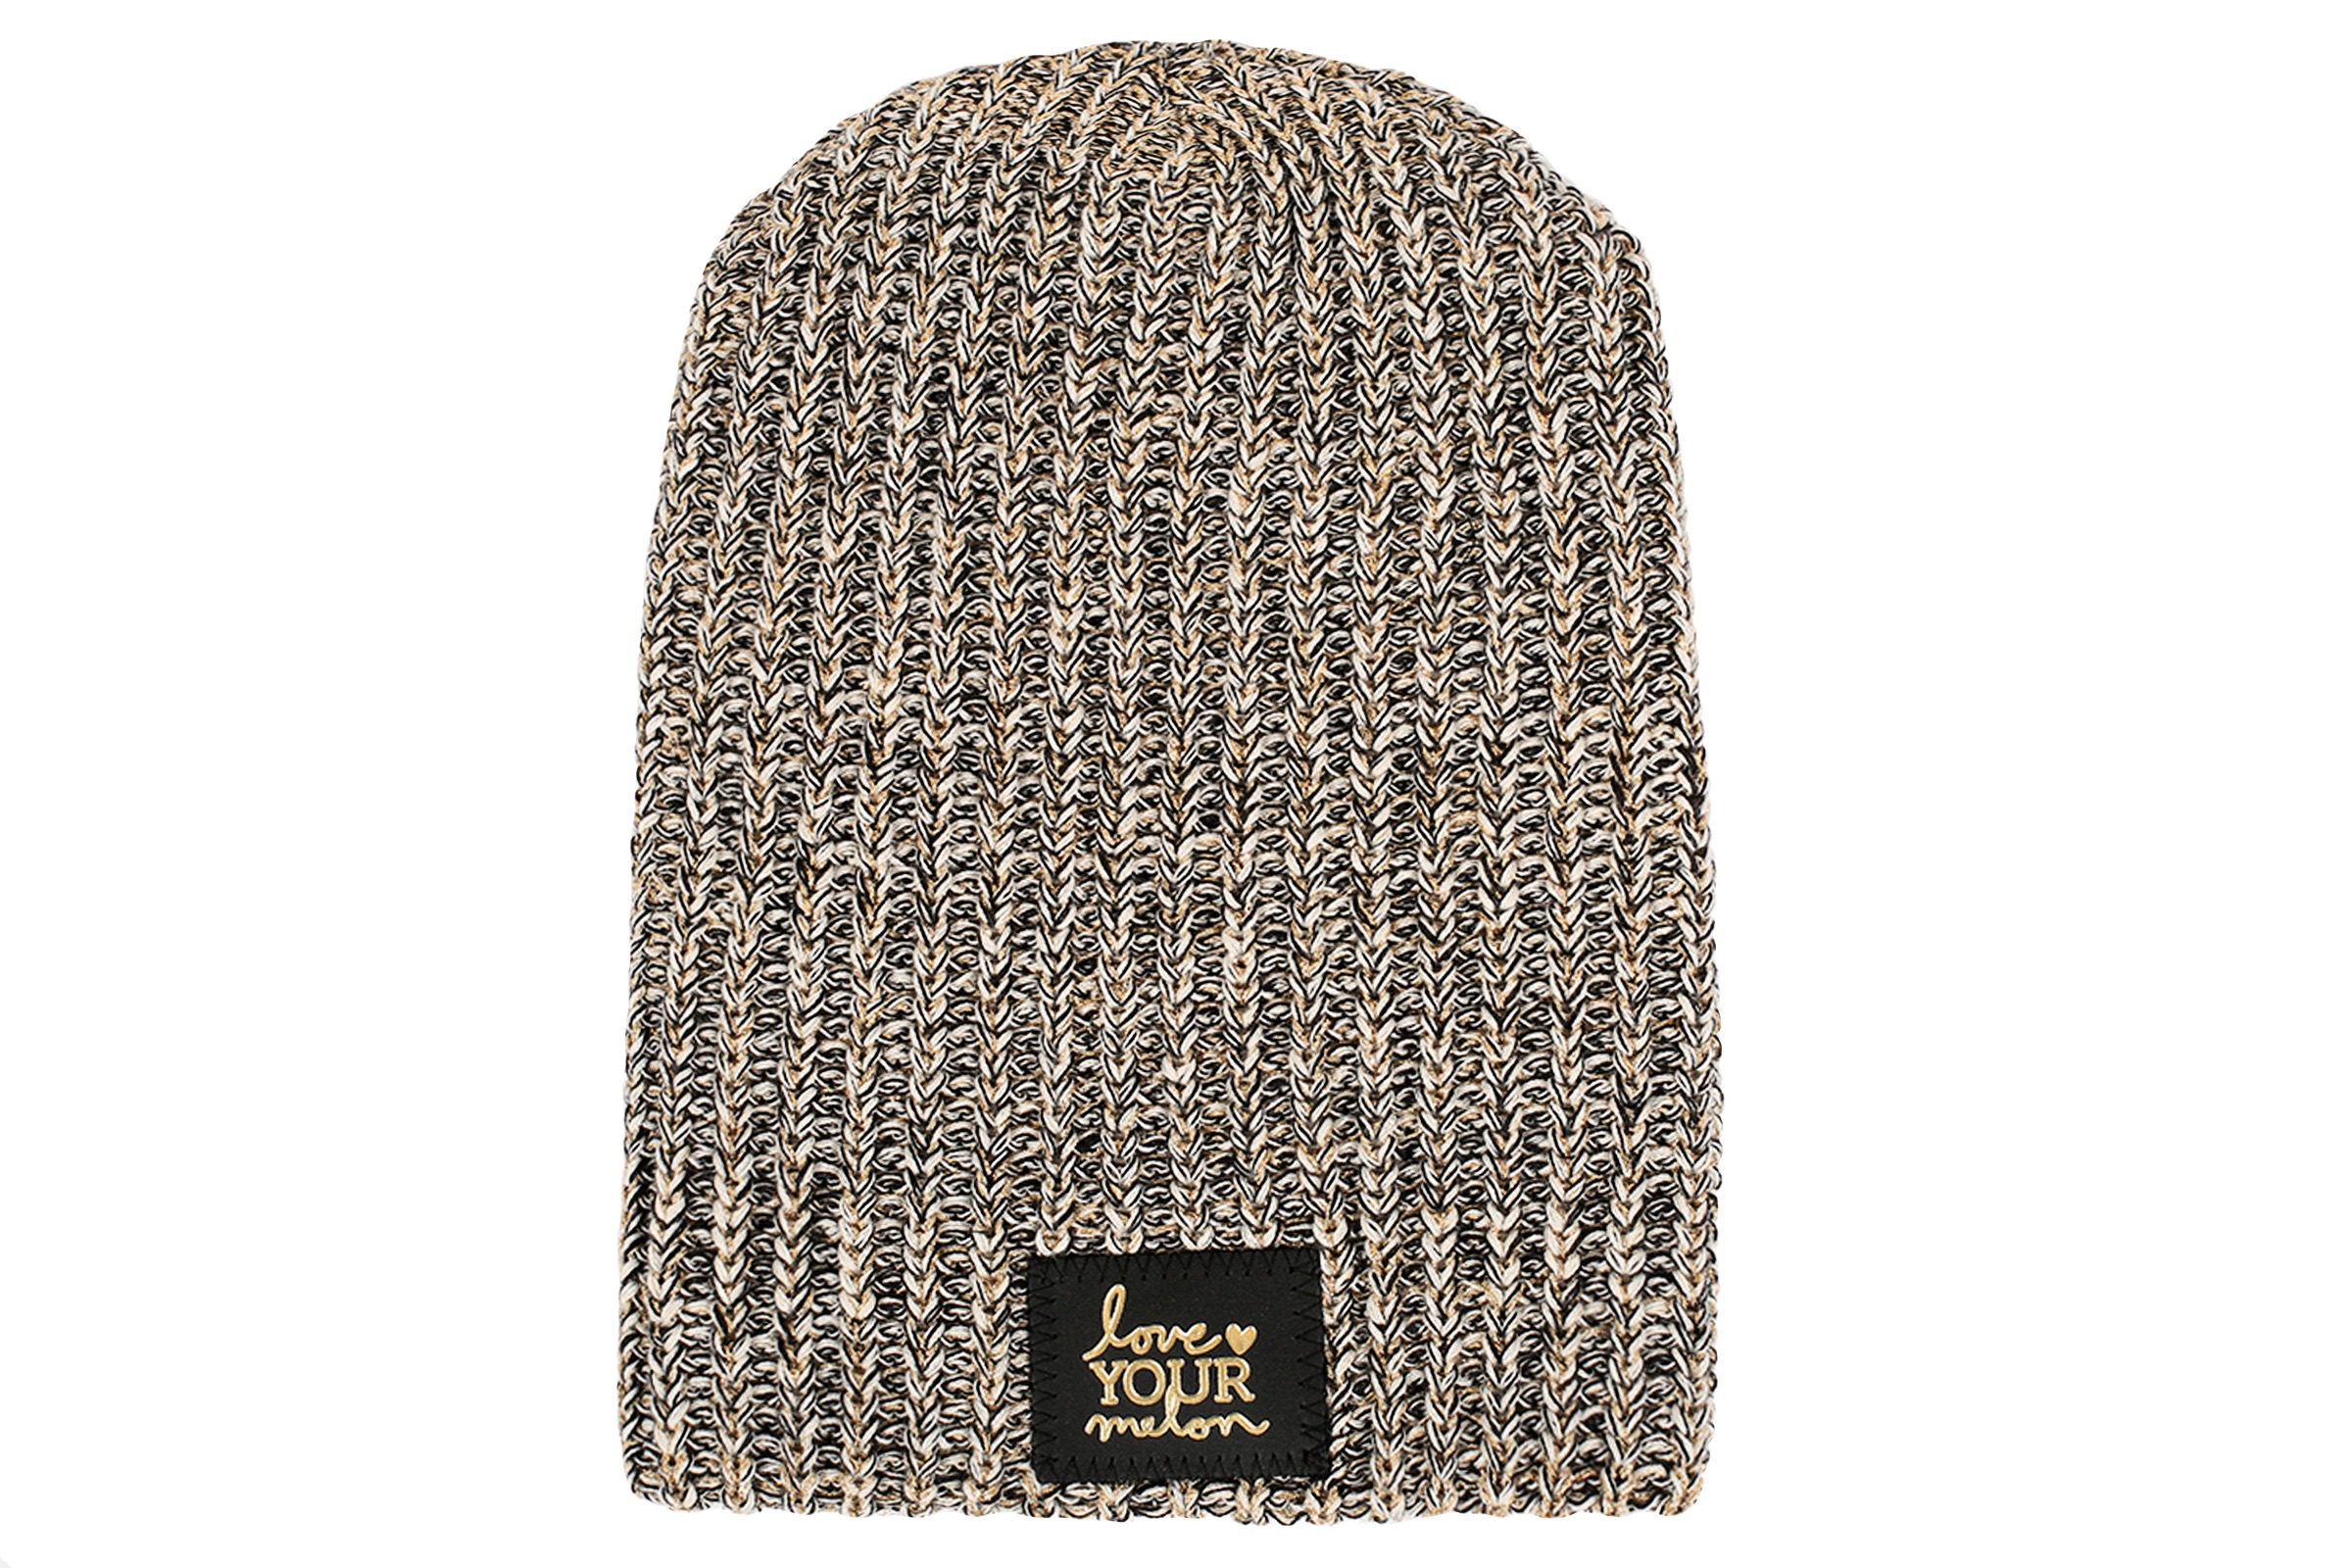 Black Speckled Beanie 
															/ Love Your Melon							